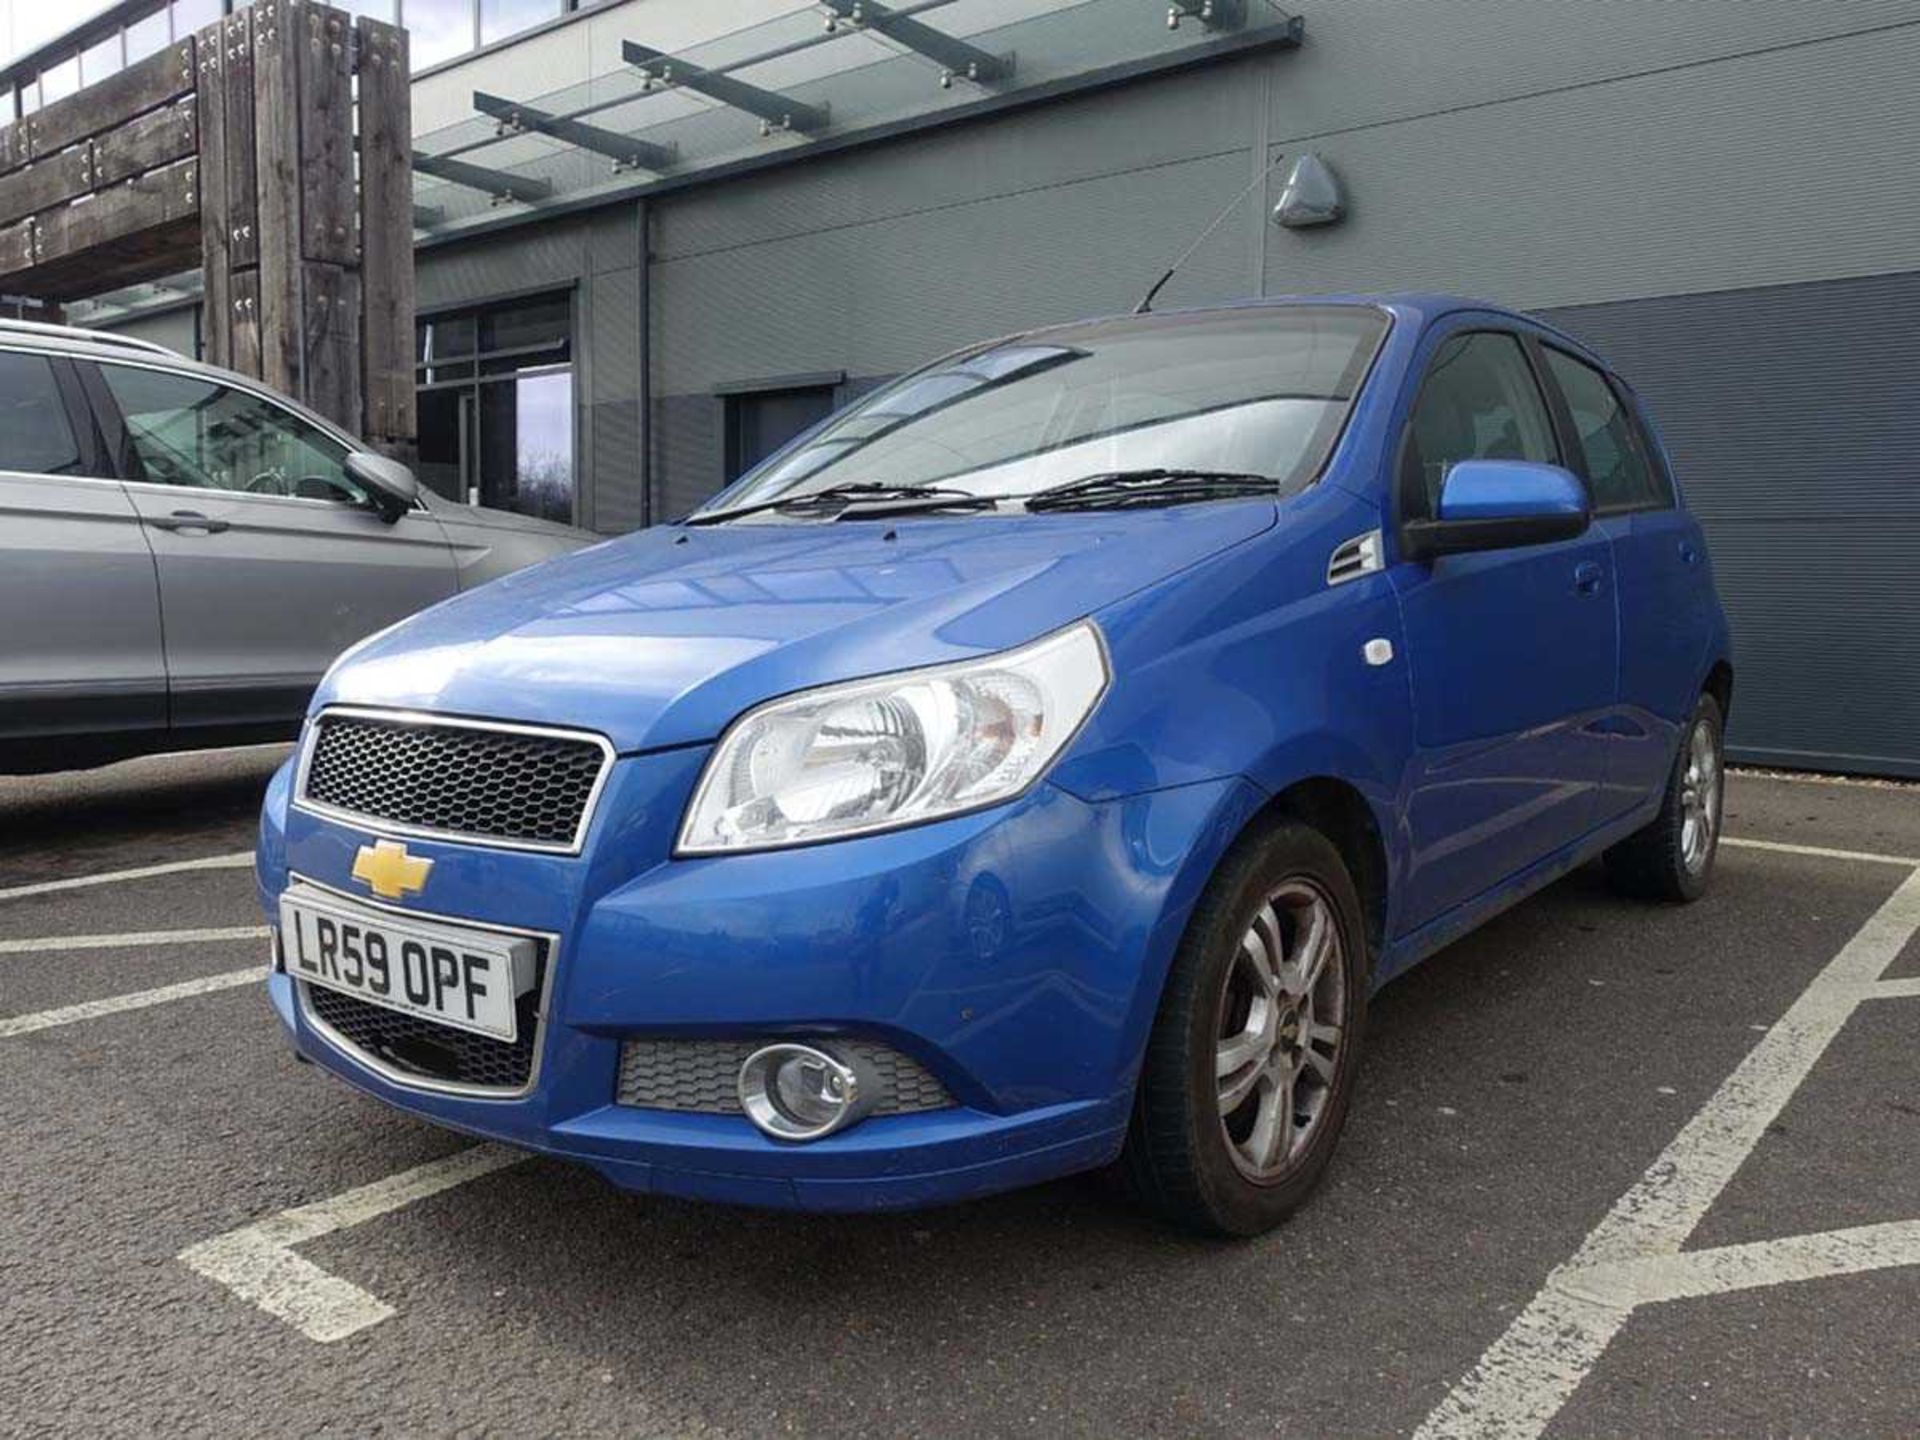 LR59 0PF (2009) Chevrolet Aveo LT Auto in blue, 5 door hatchback, petrol, 1399cc, V5 and two keys, 4 - Image 2 of 10